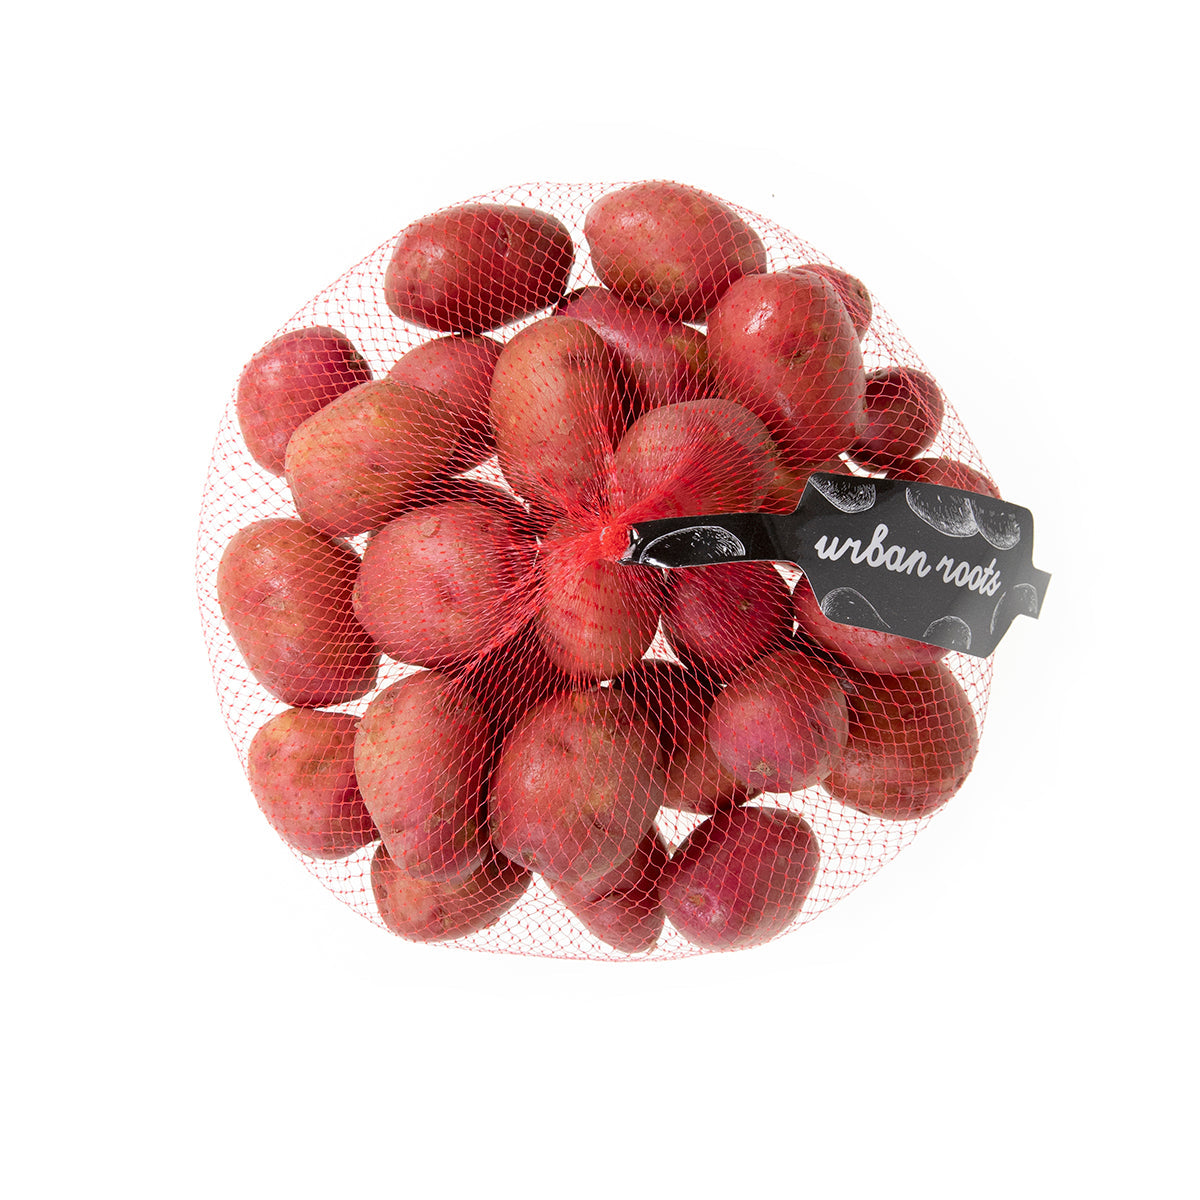 Urban Roots Red Pee Wee Potatoes 24 0Z